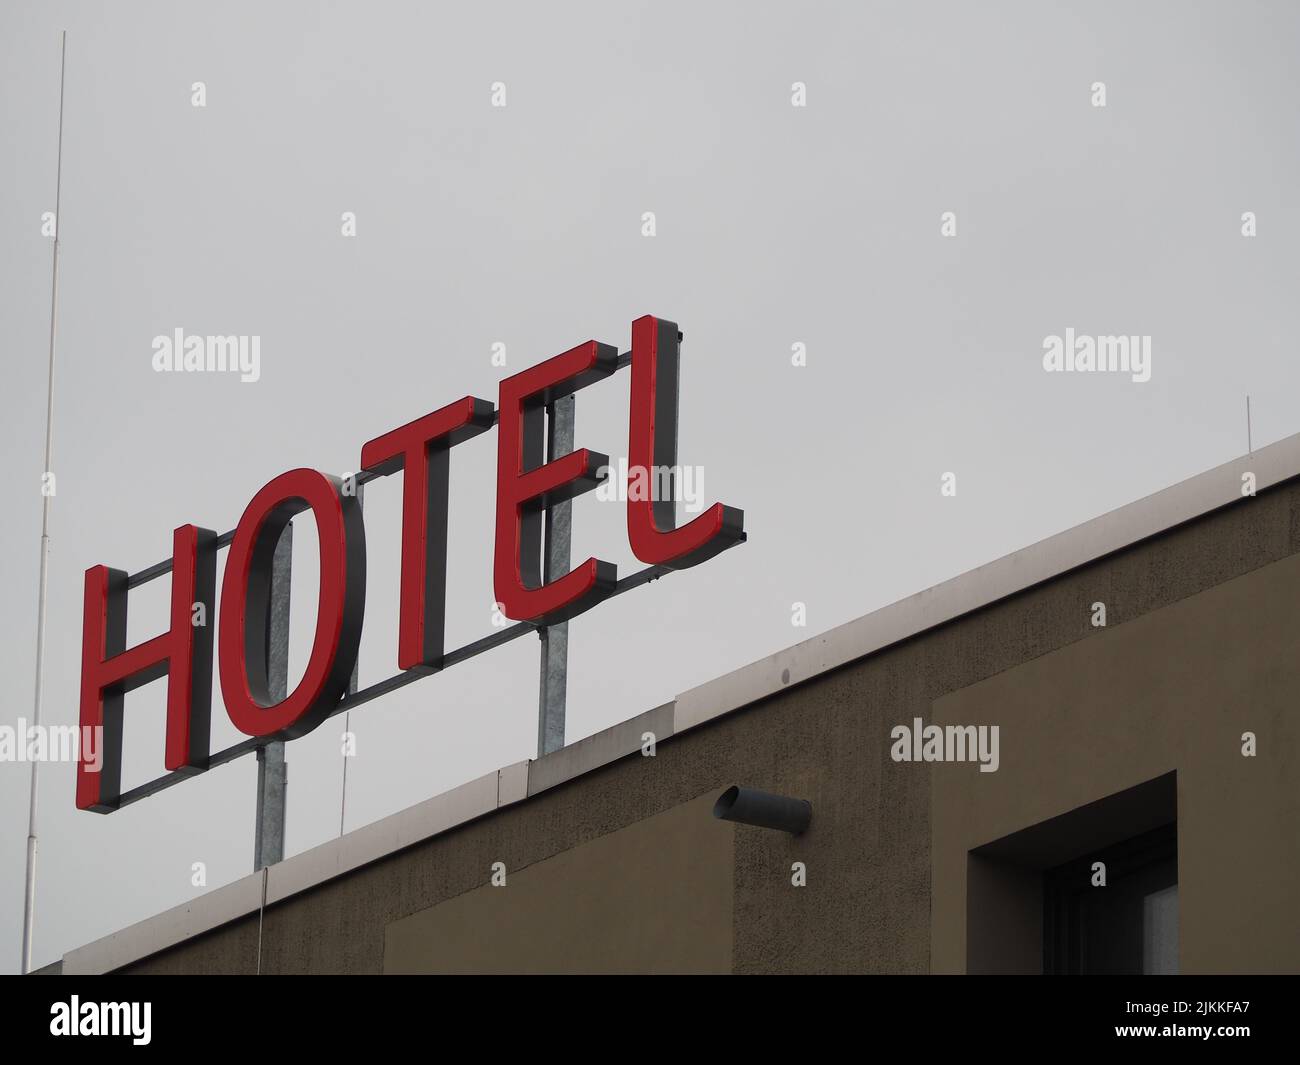 A low angle shot of a red Hotel sign on the top of a building against cloudy sky during daytime Stock Photo